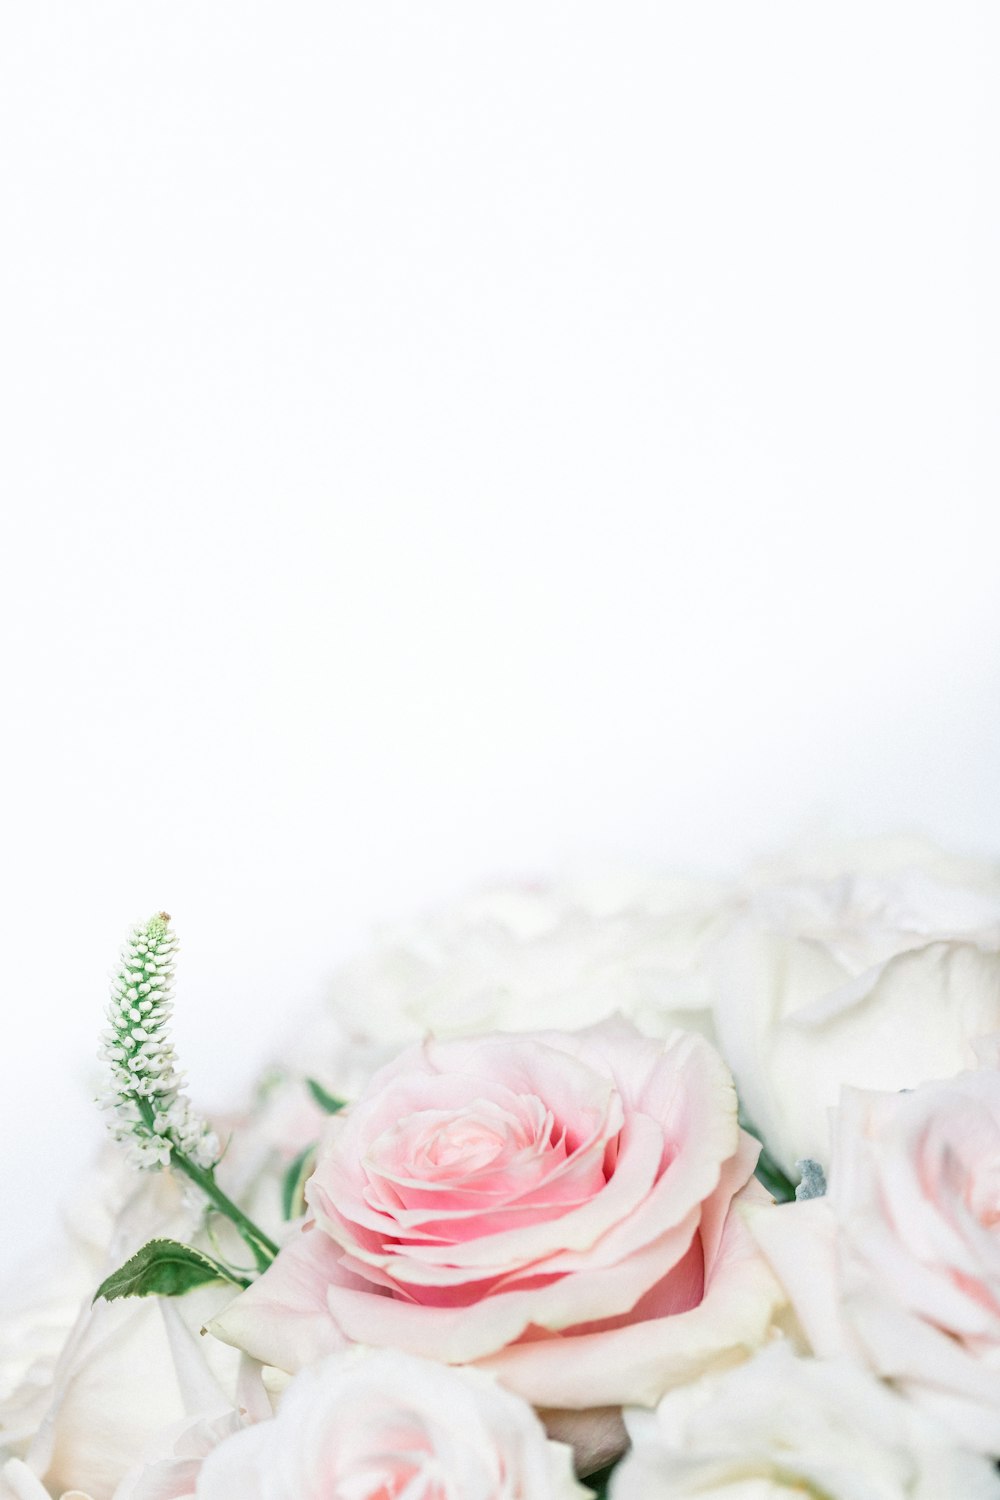 pink roses on white surface